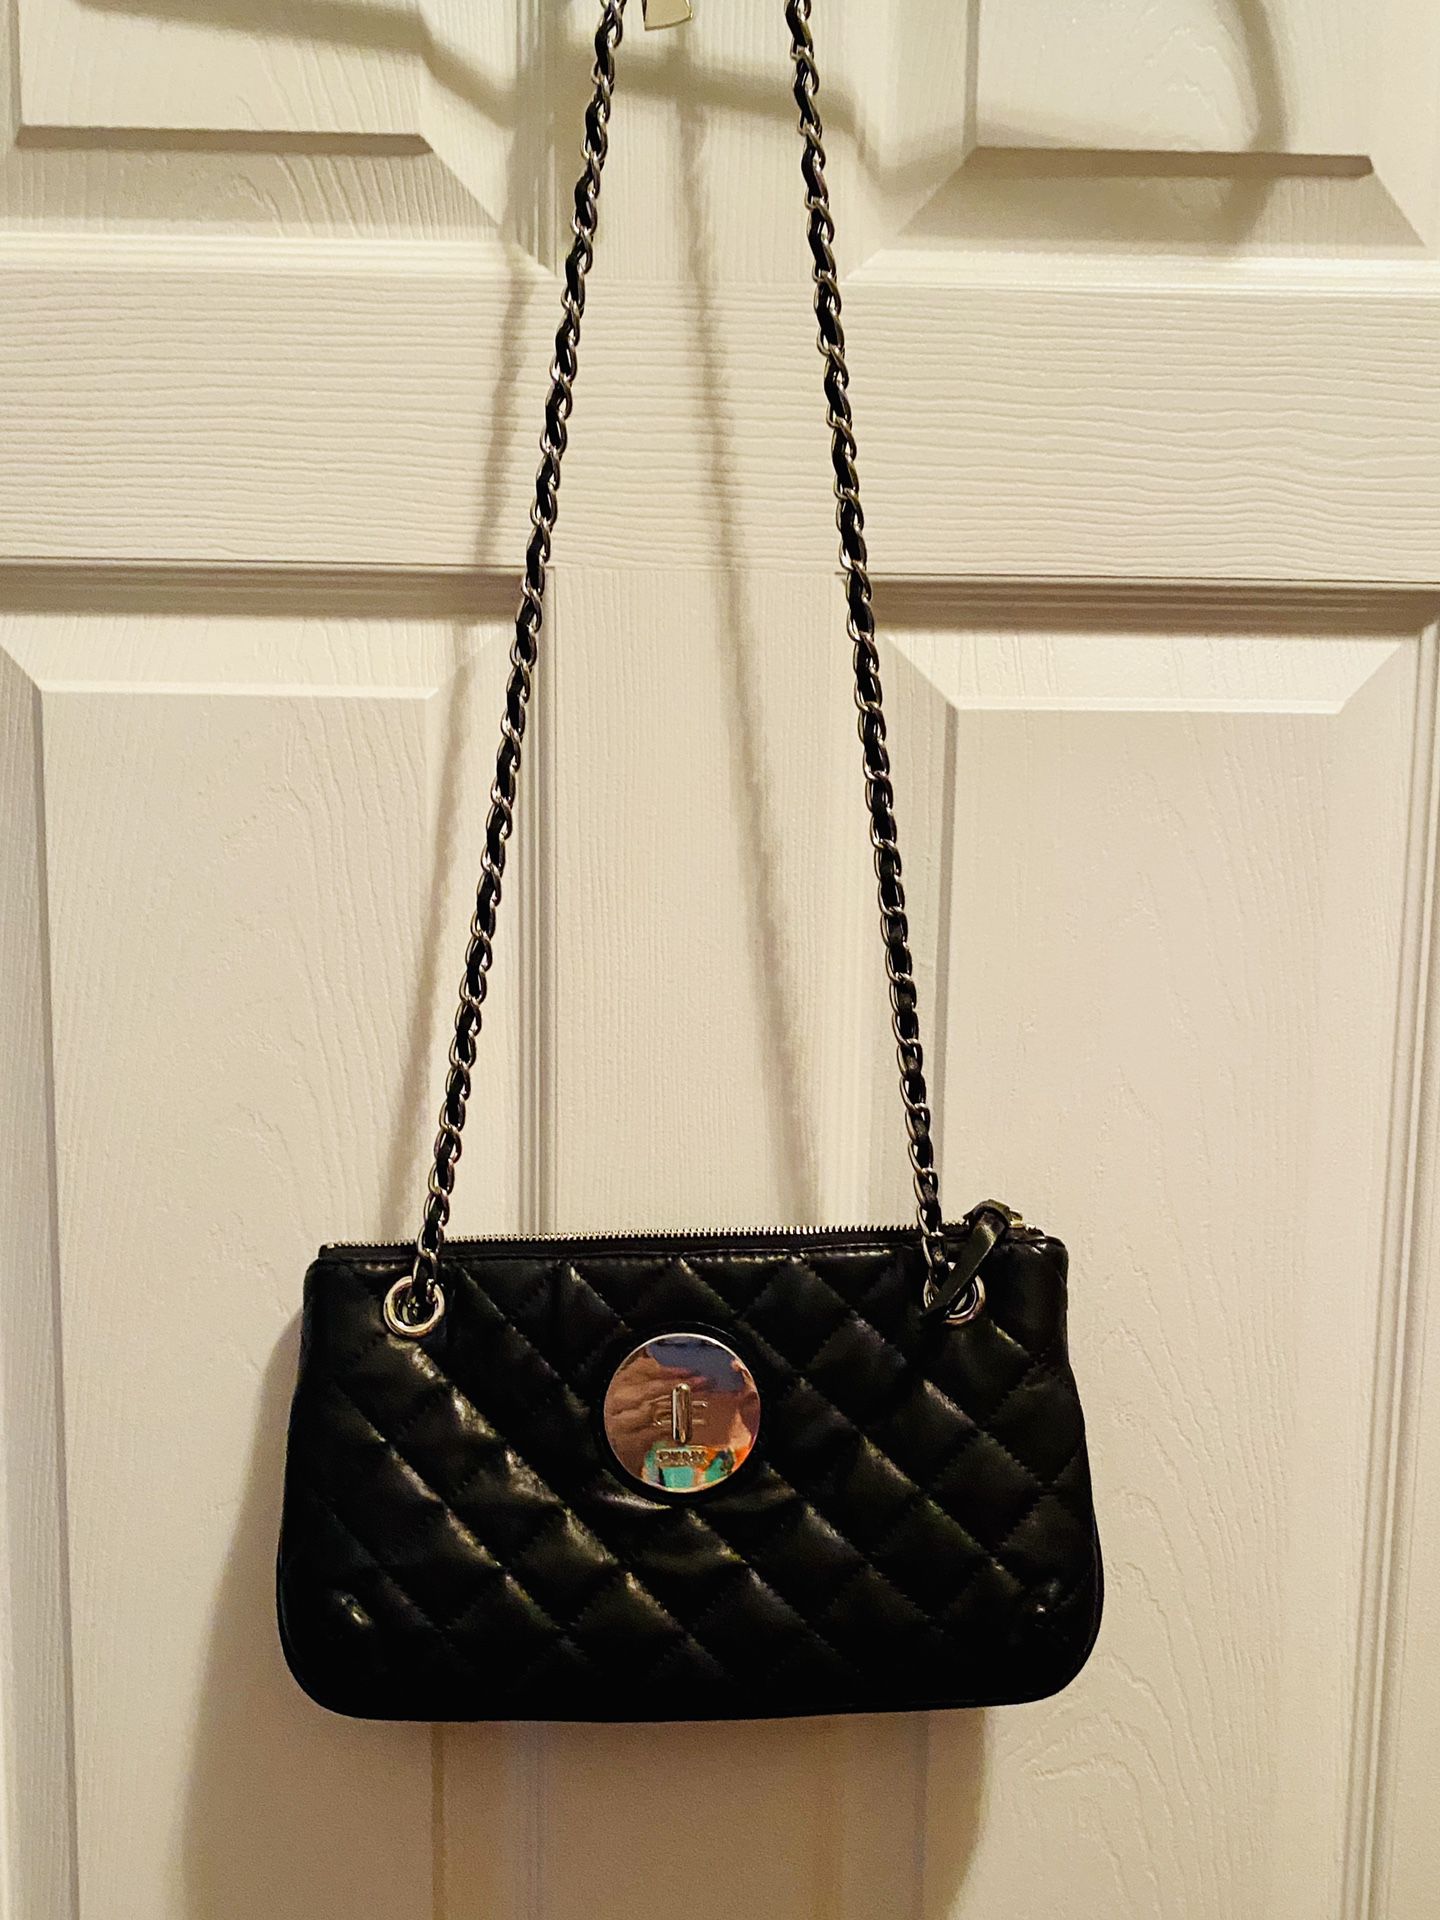 DKNY Quilted Leather Crossbody/Shoulder Bag